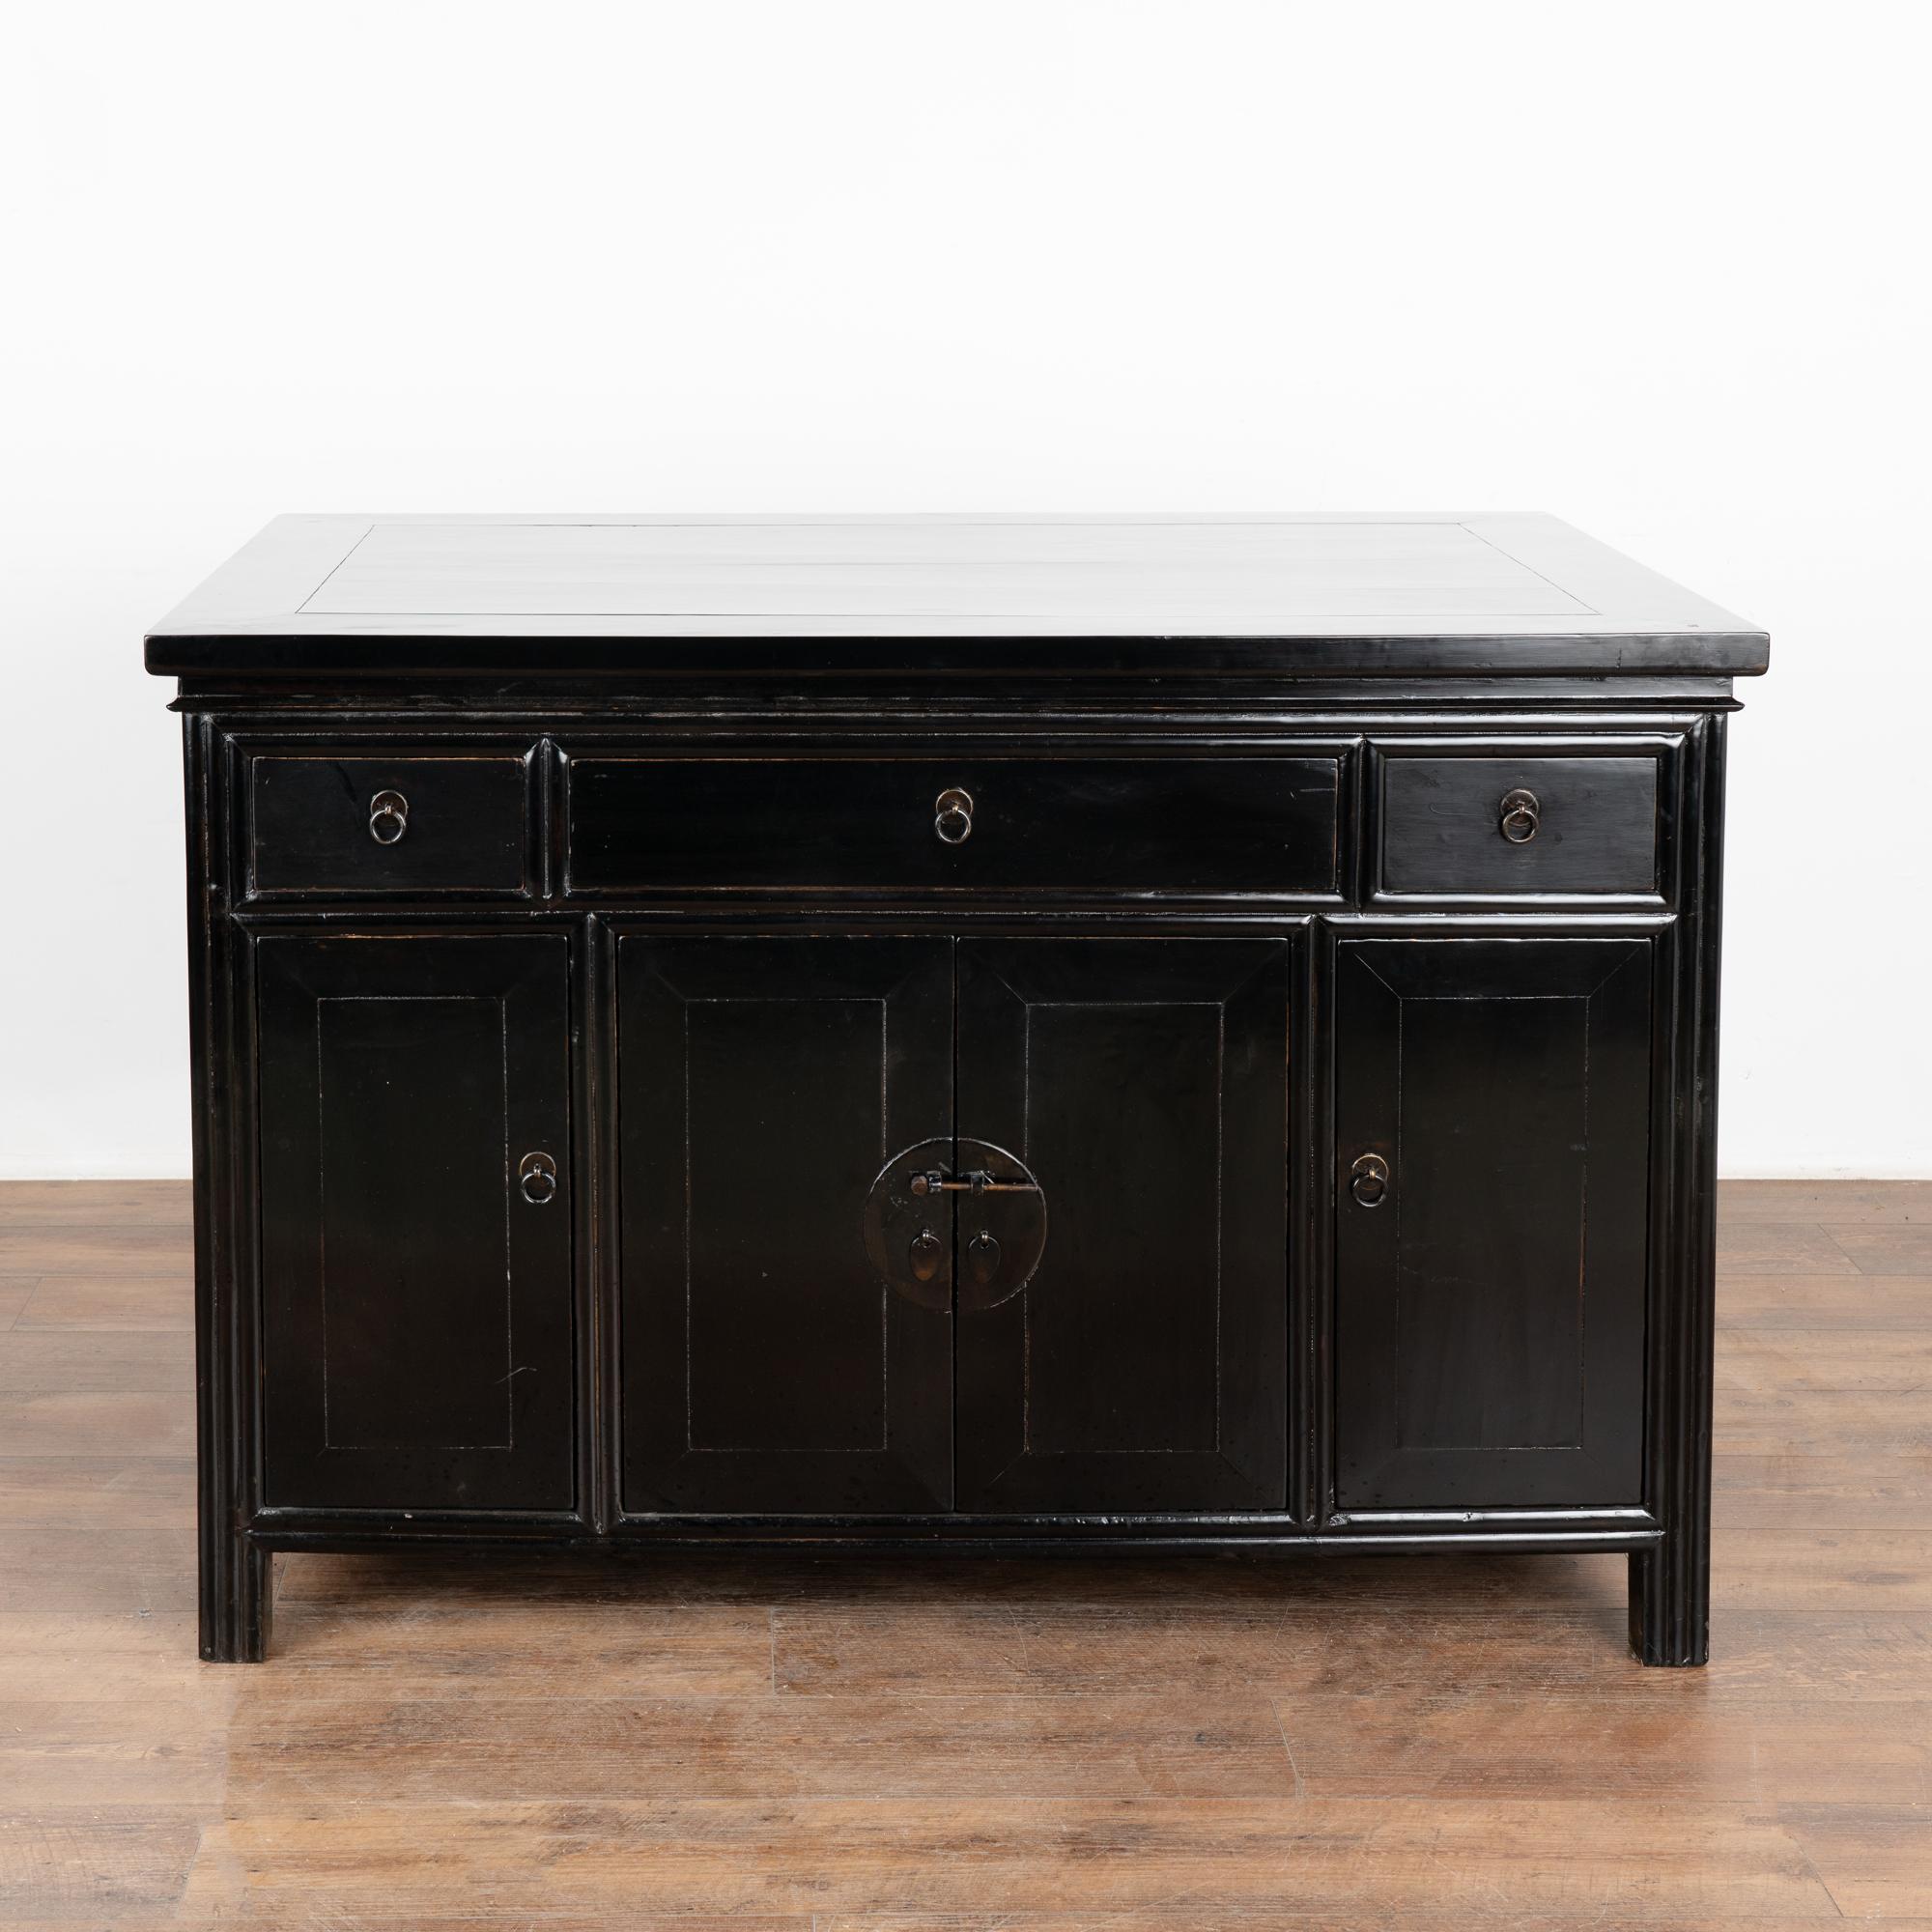 Chinese Export Black Lacquered Free Standing Console Cabinet or Kitchen Island, China 1880